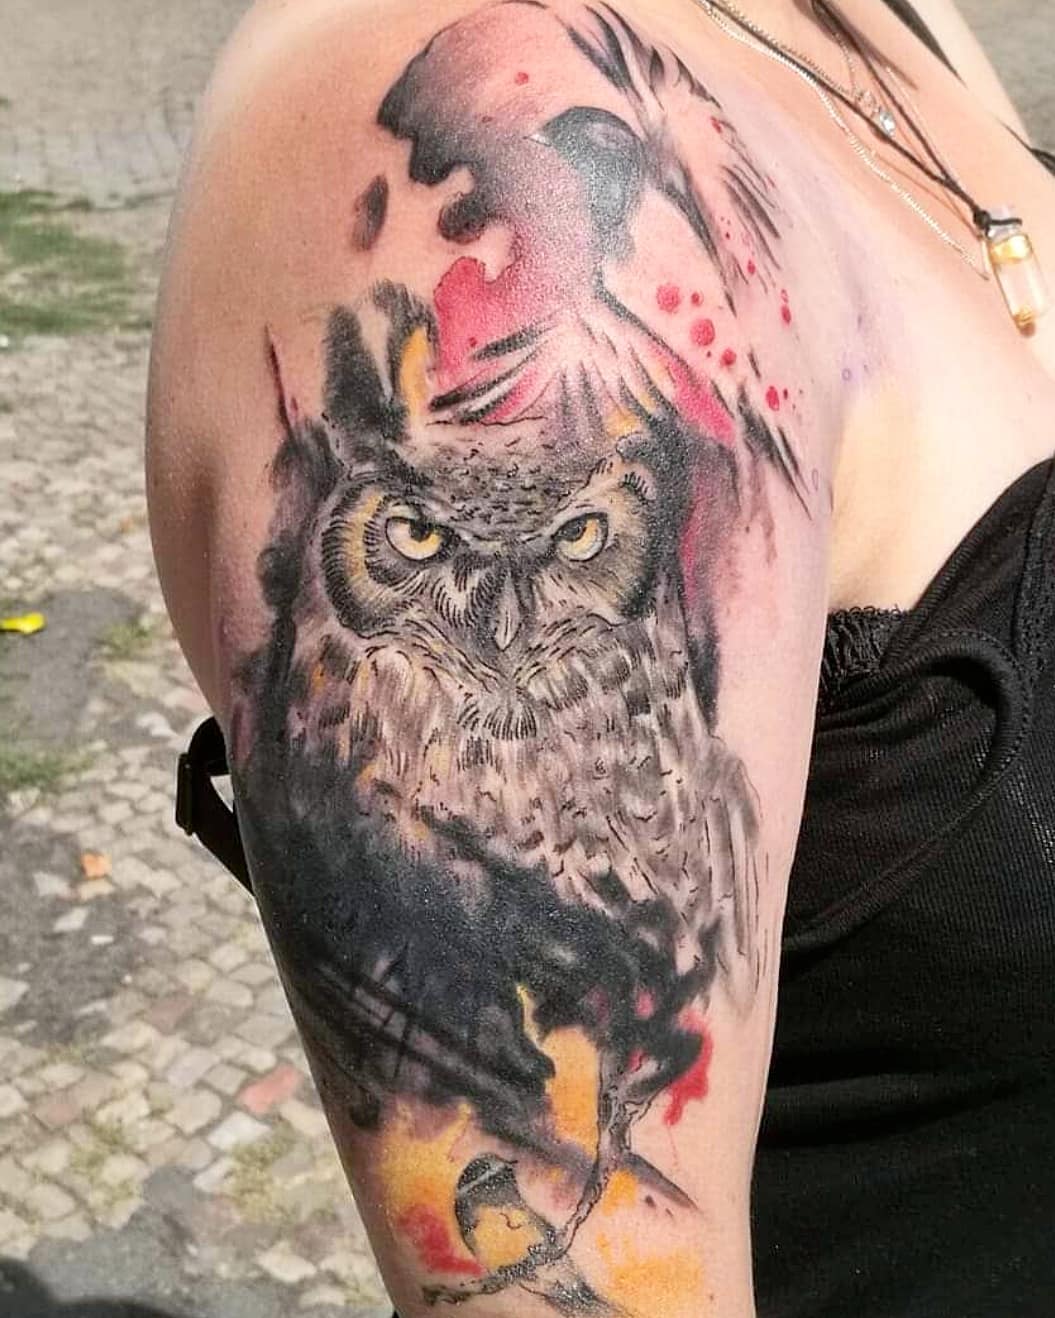 18+ Fascinating images of owl tattoo for women